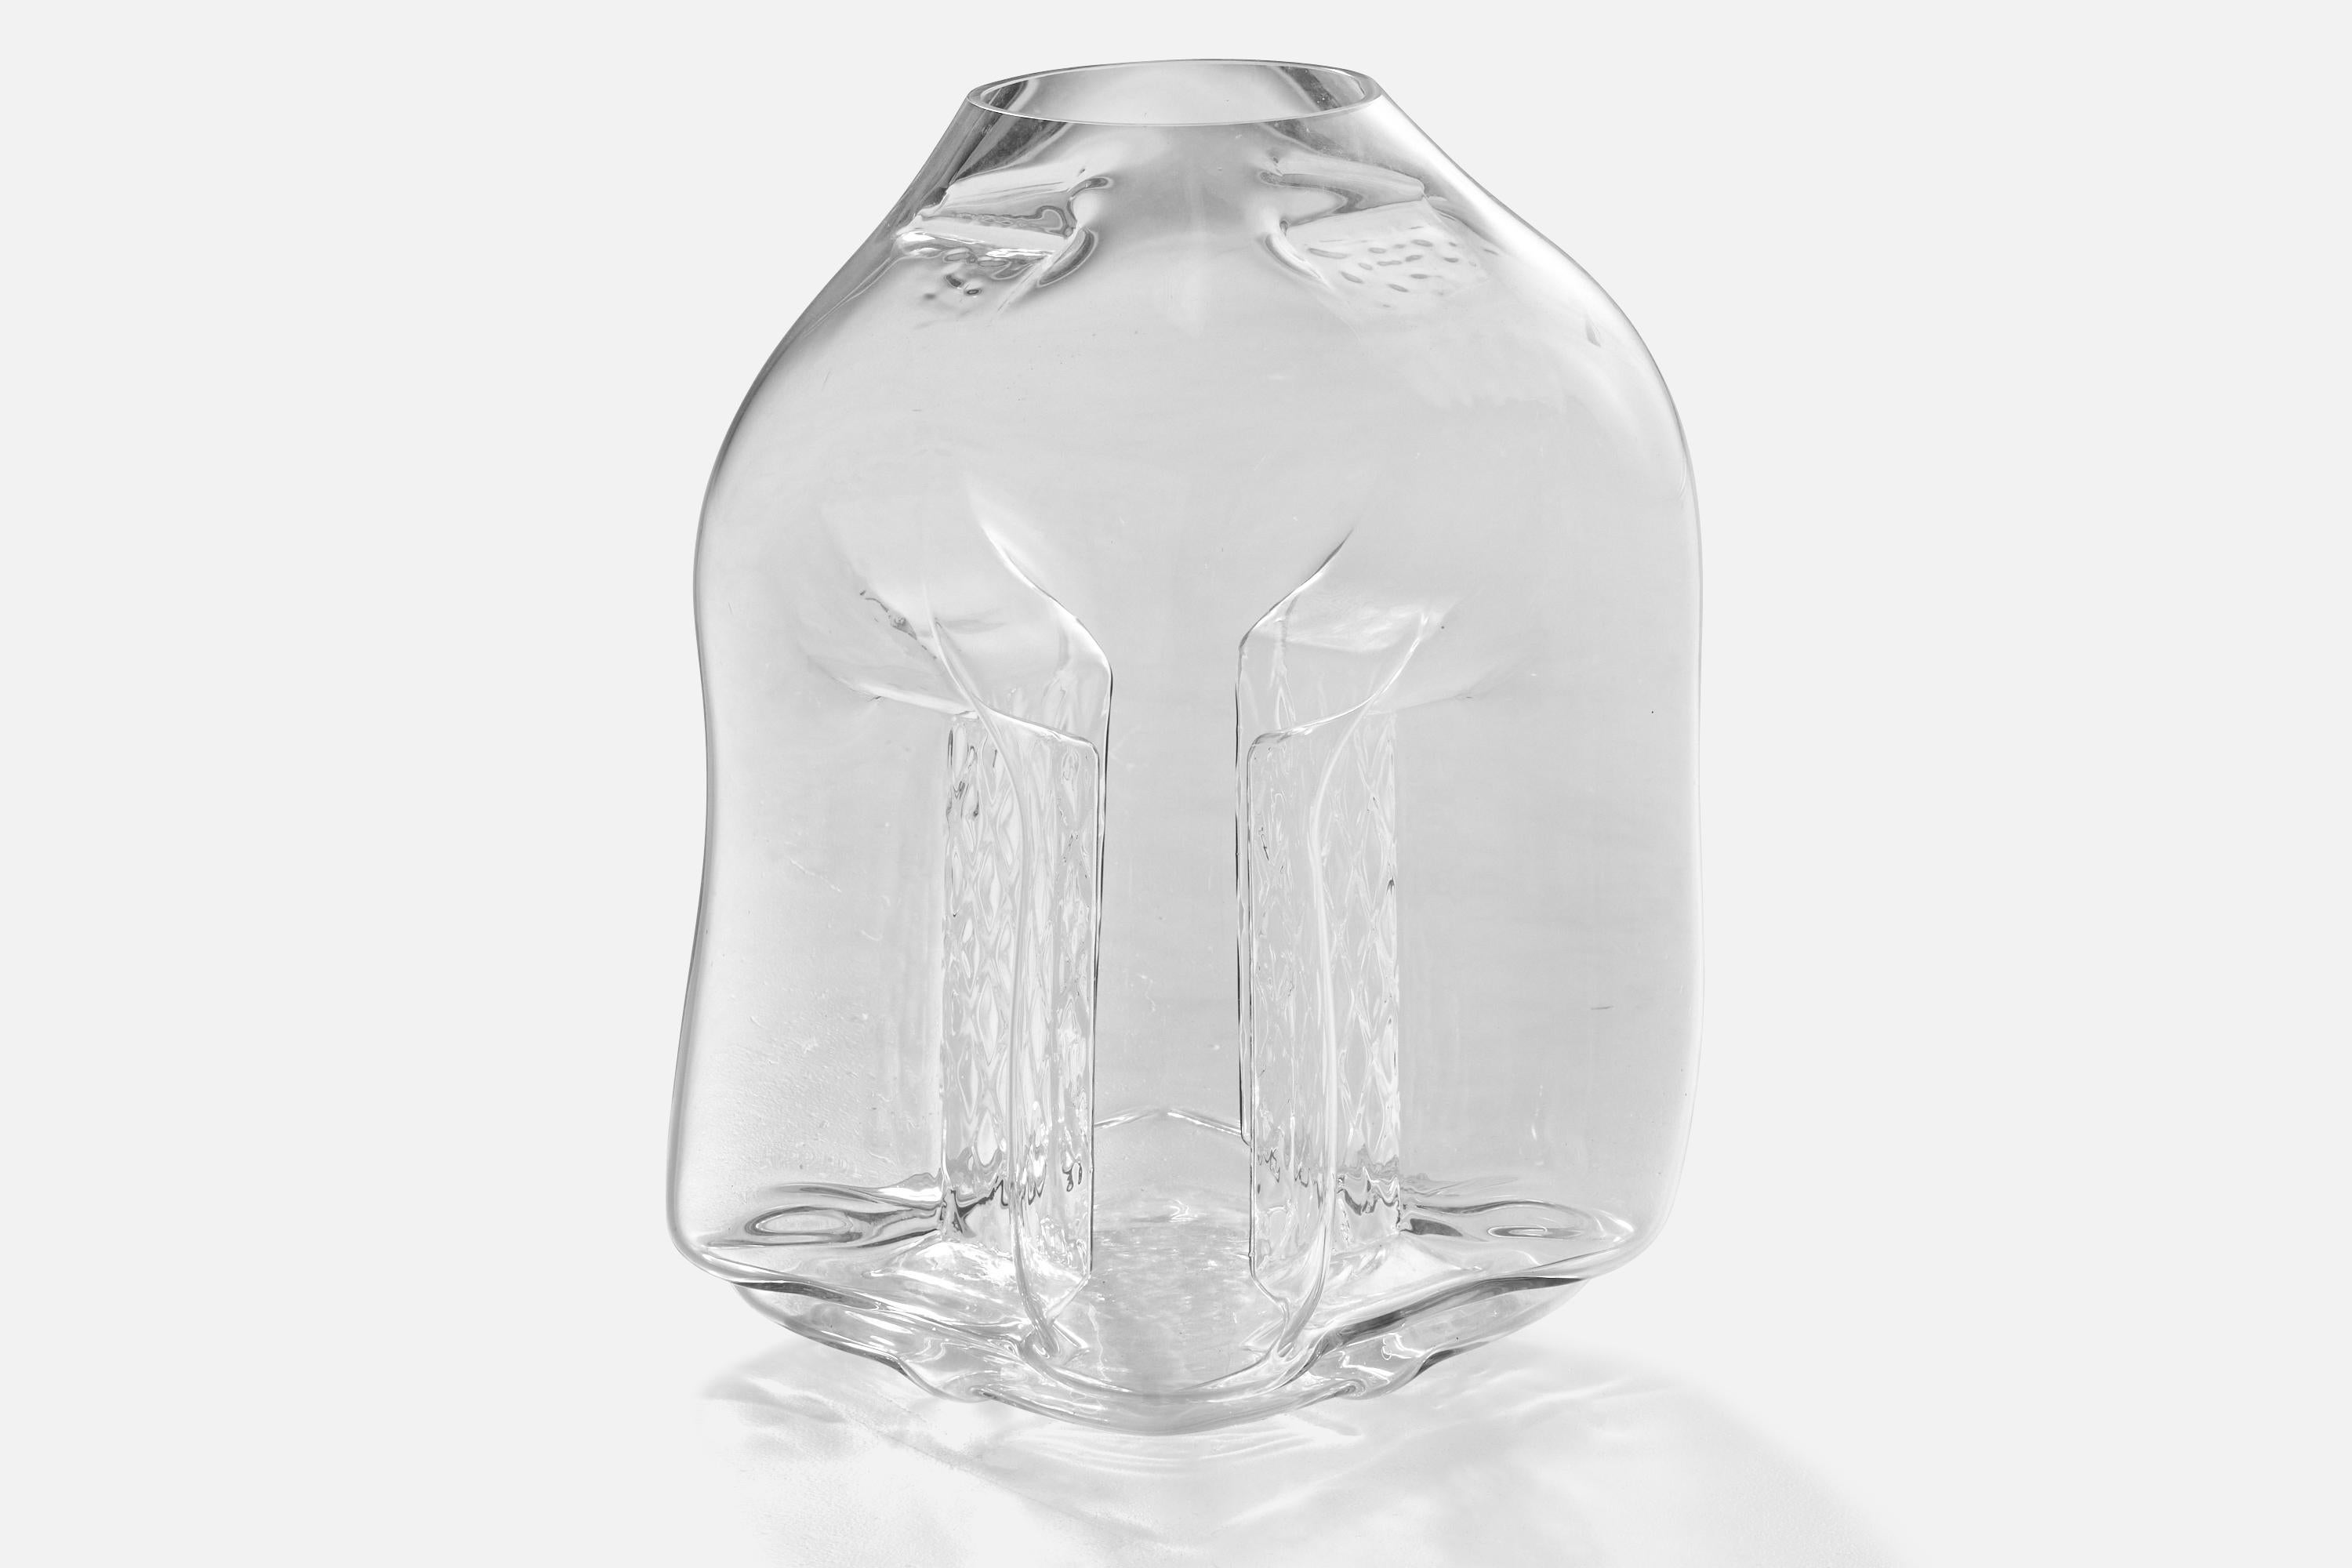 A large moulded glass vase designed and produced by Toni Zuccheri, Italy, 1970s.







